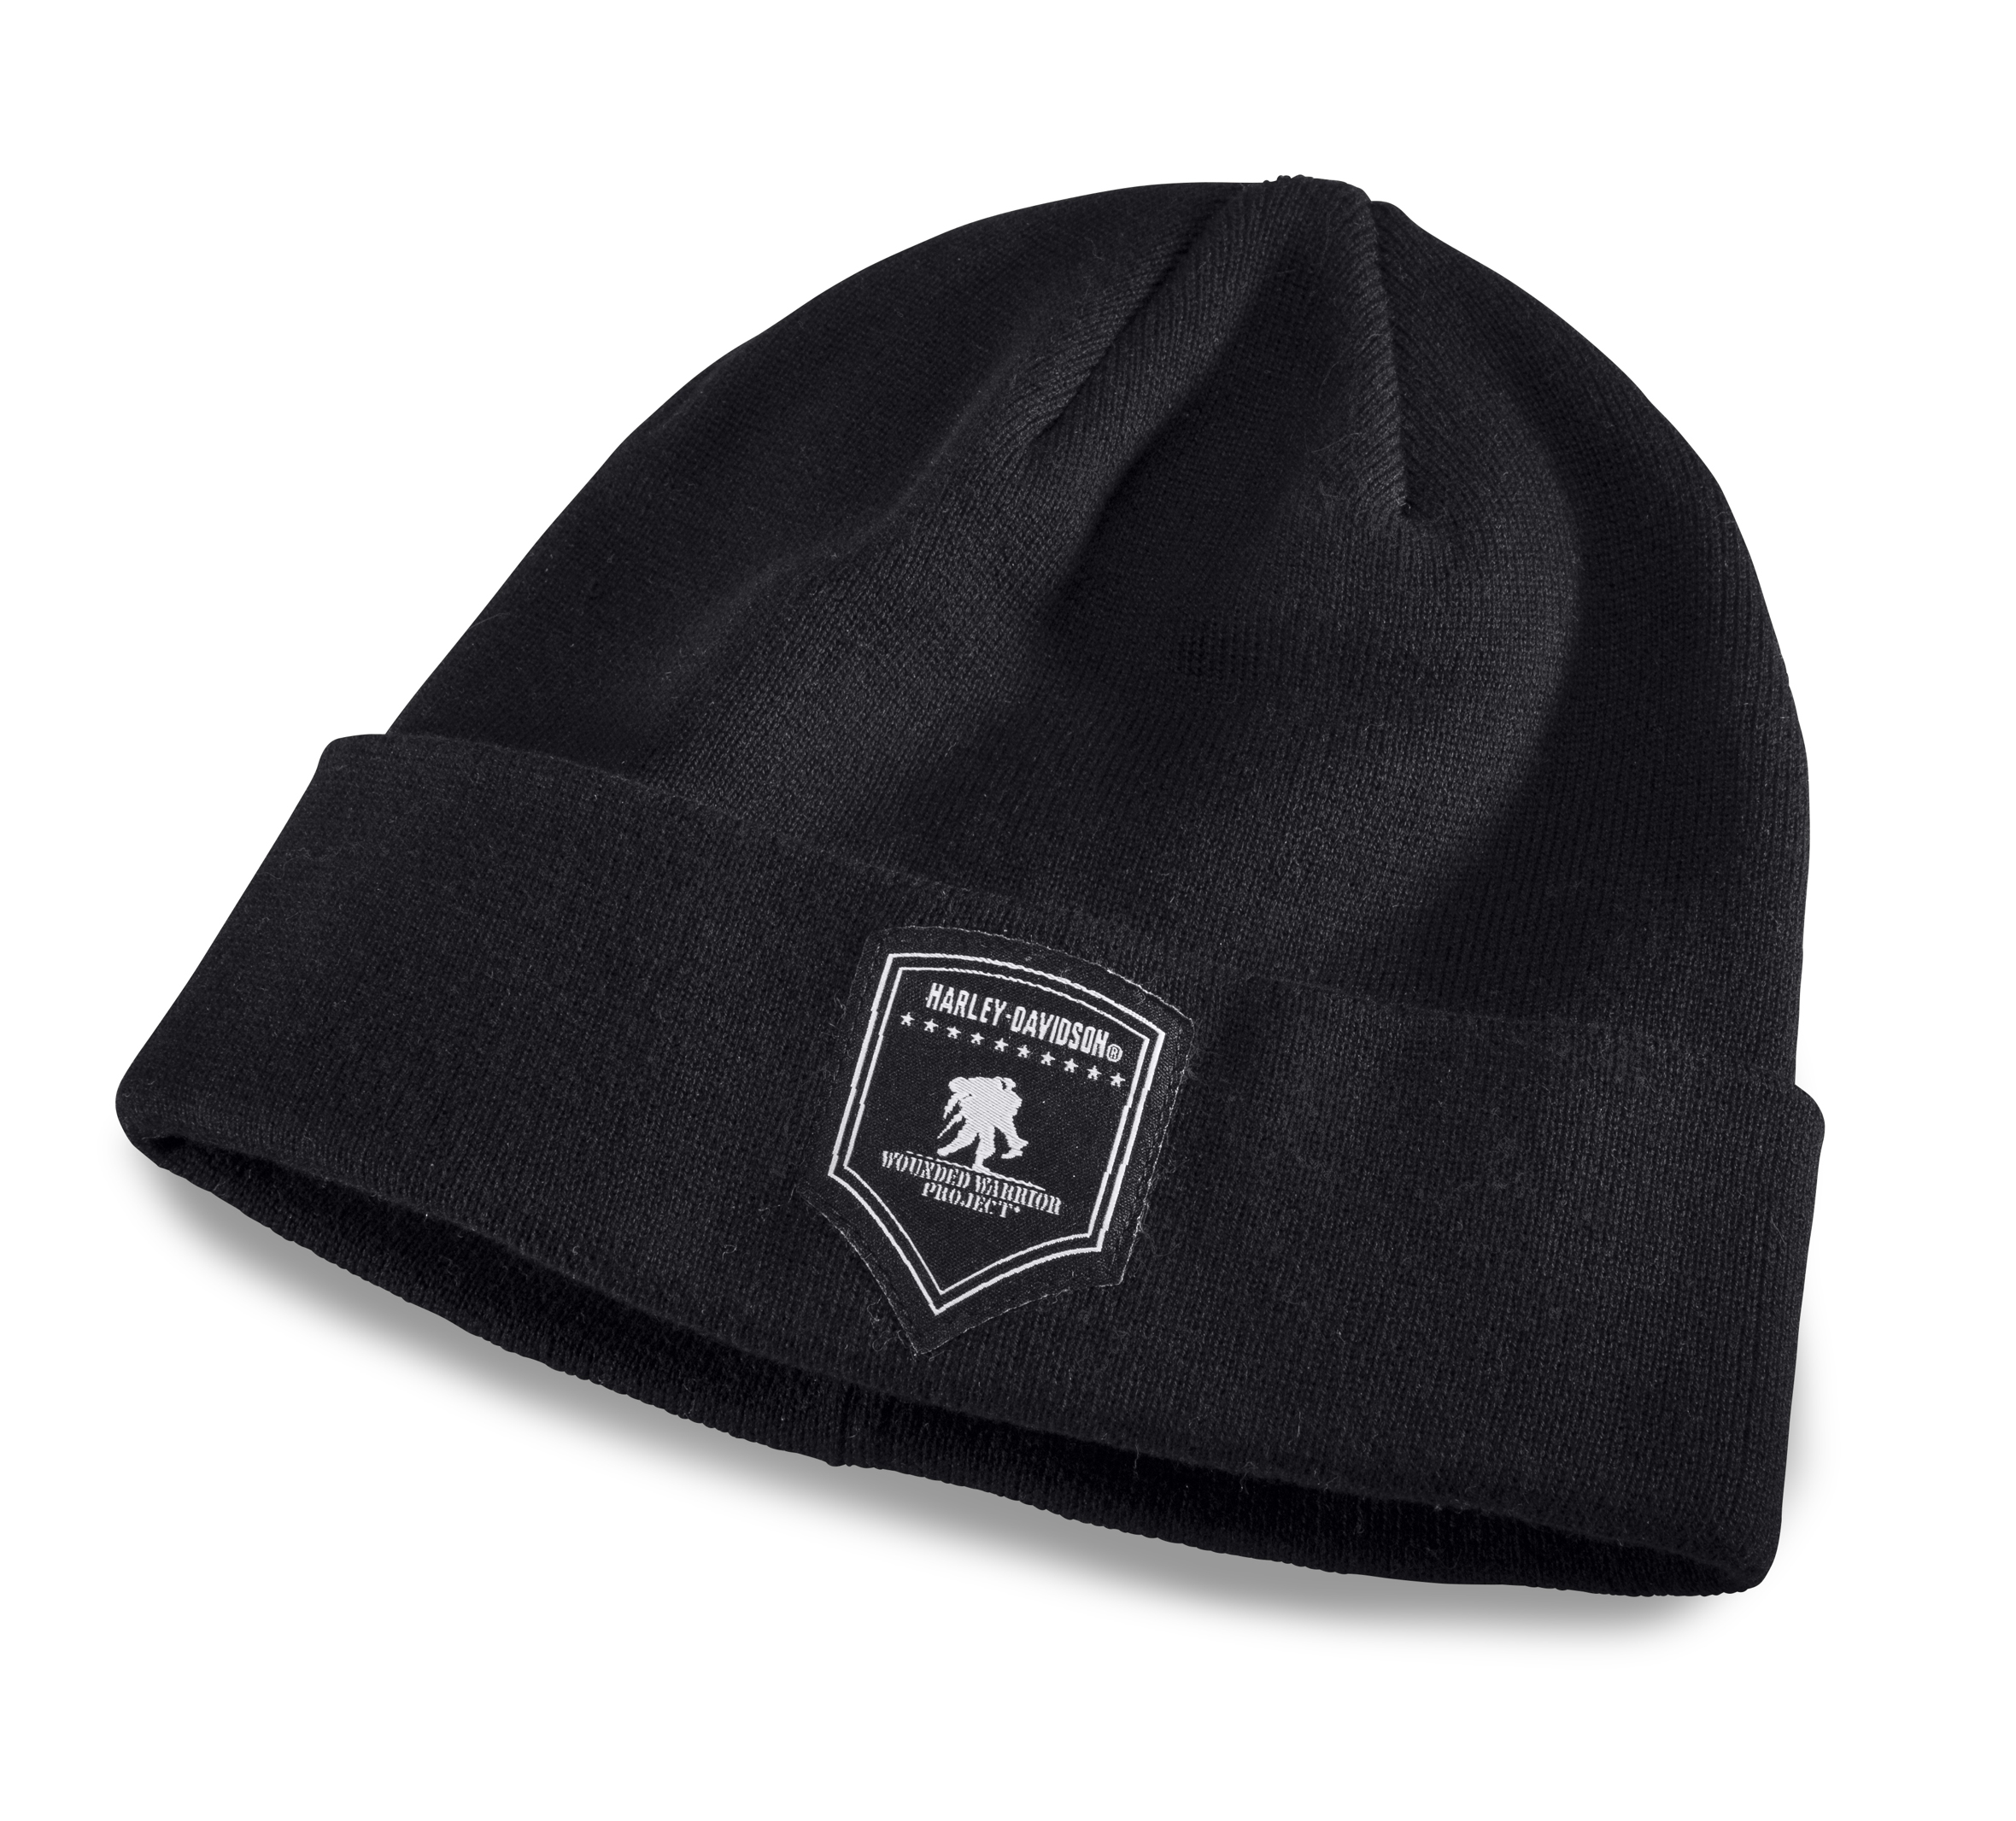 Harley-Davidson Wounded Warrior Project Cuffed Knit Hat | Harley ...